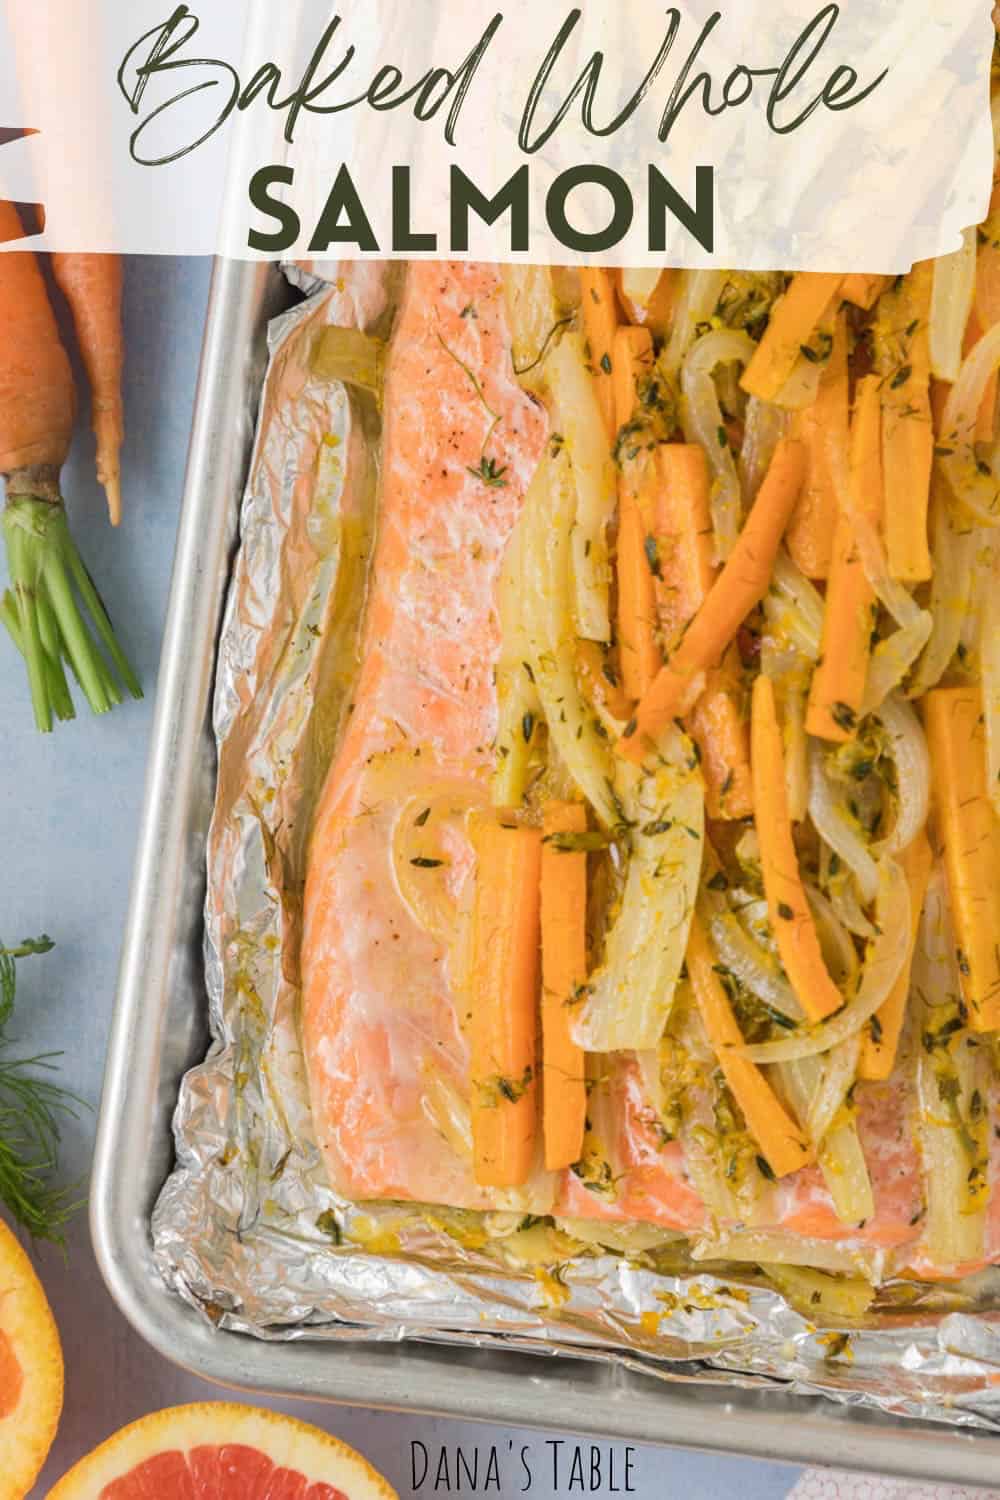 Salmon and vegetables on a baking sheet just out of the oven.